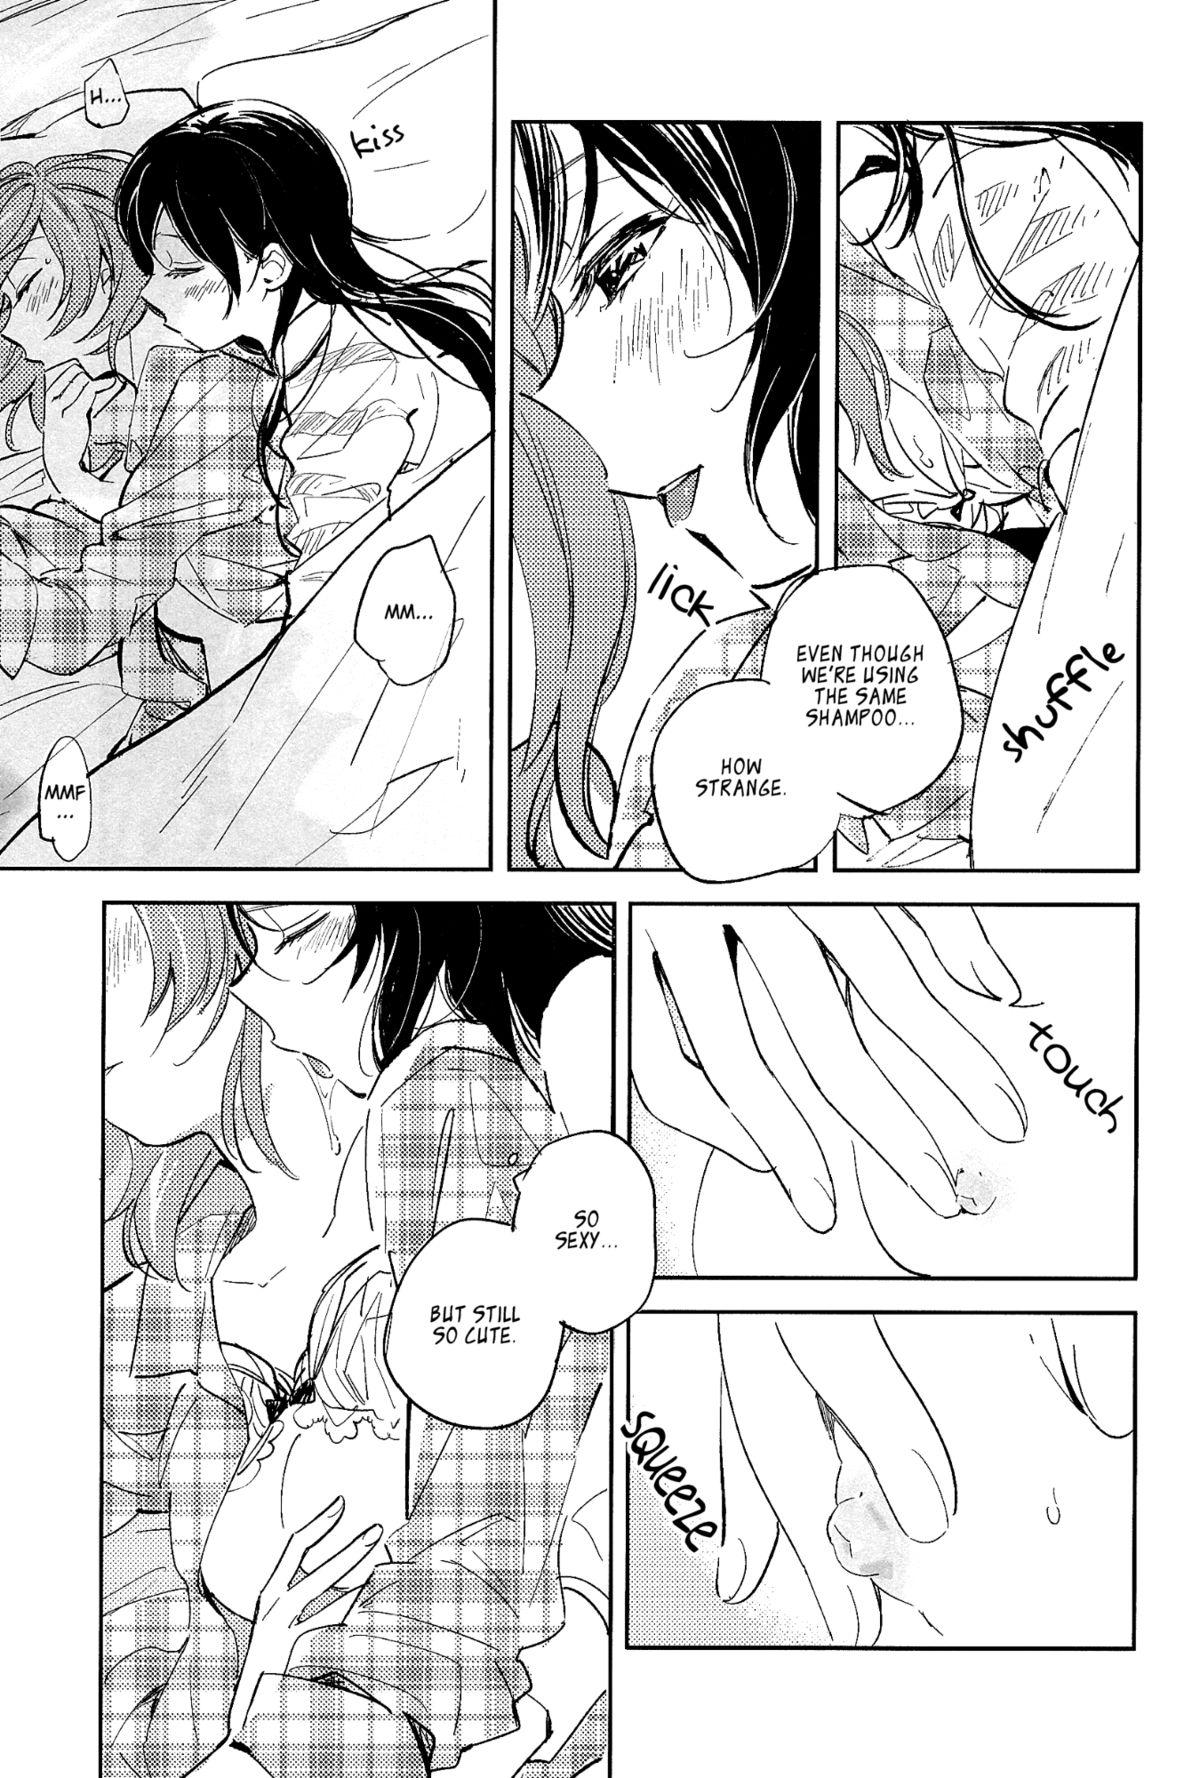 Alone Koibito no Jikan | Time for Lovers - Love live Amateur Sex - Page 7